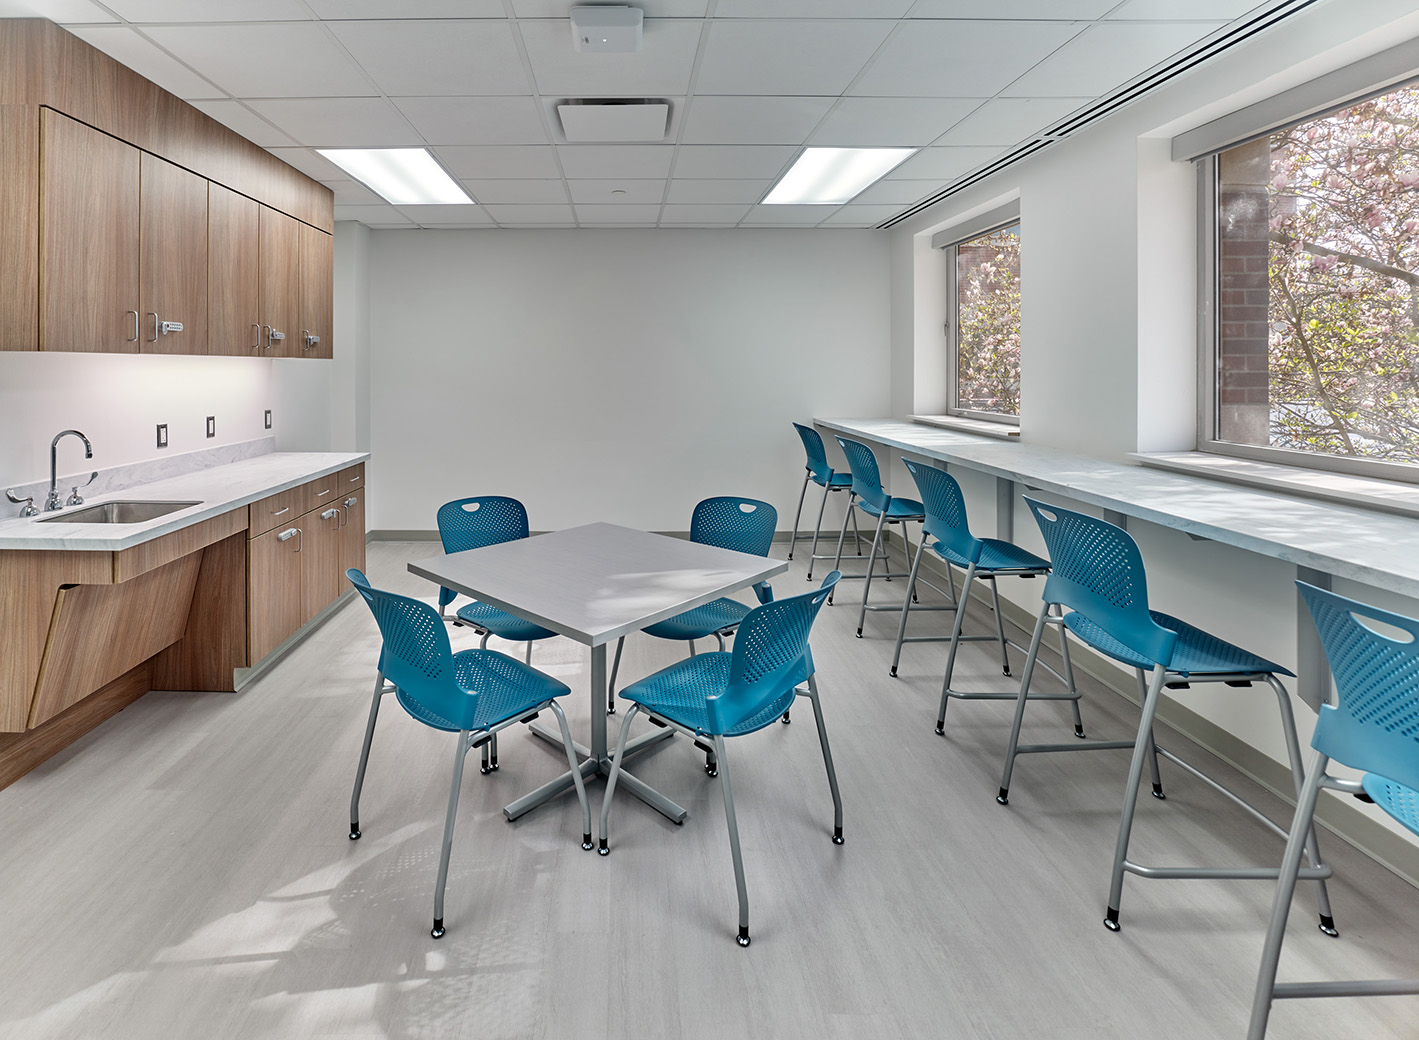 A break room at the ENT and Oral Surgery Suite at Jefferson Health featuring tables and chairs